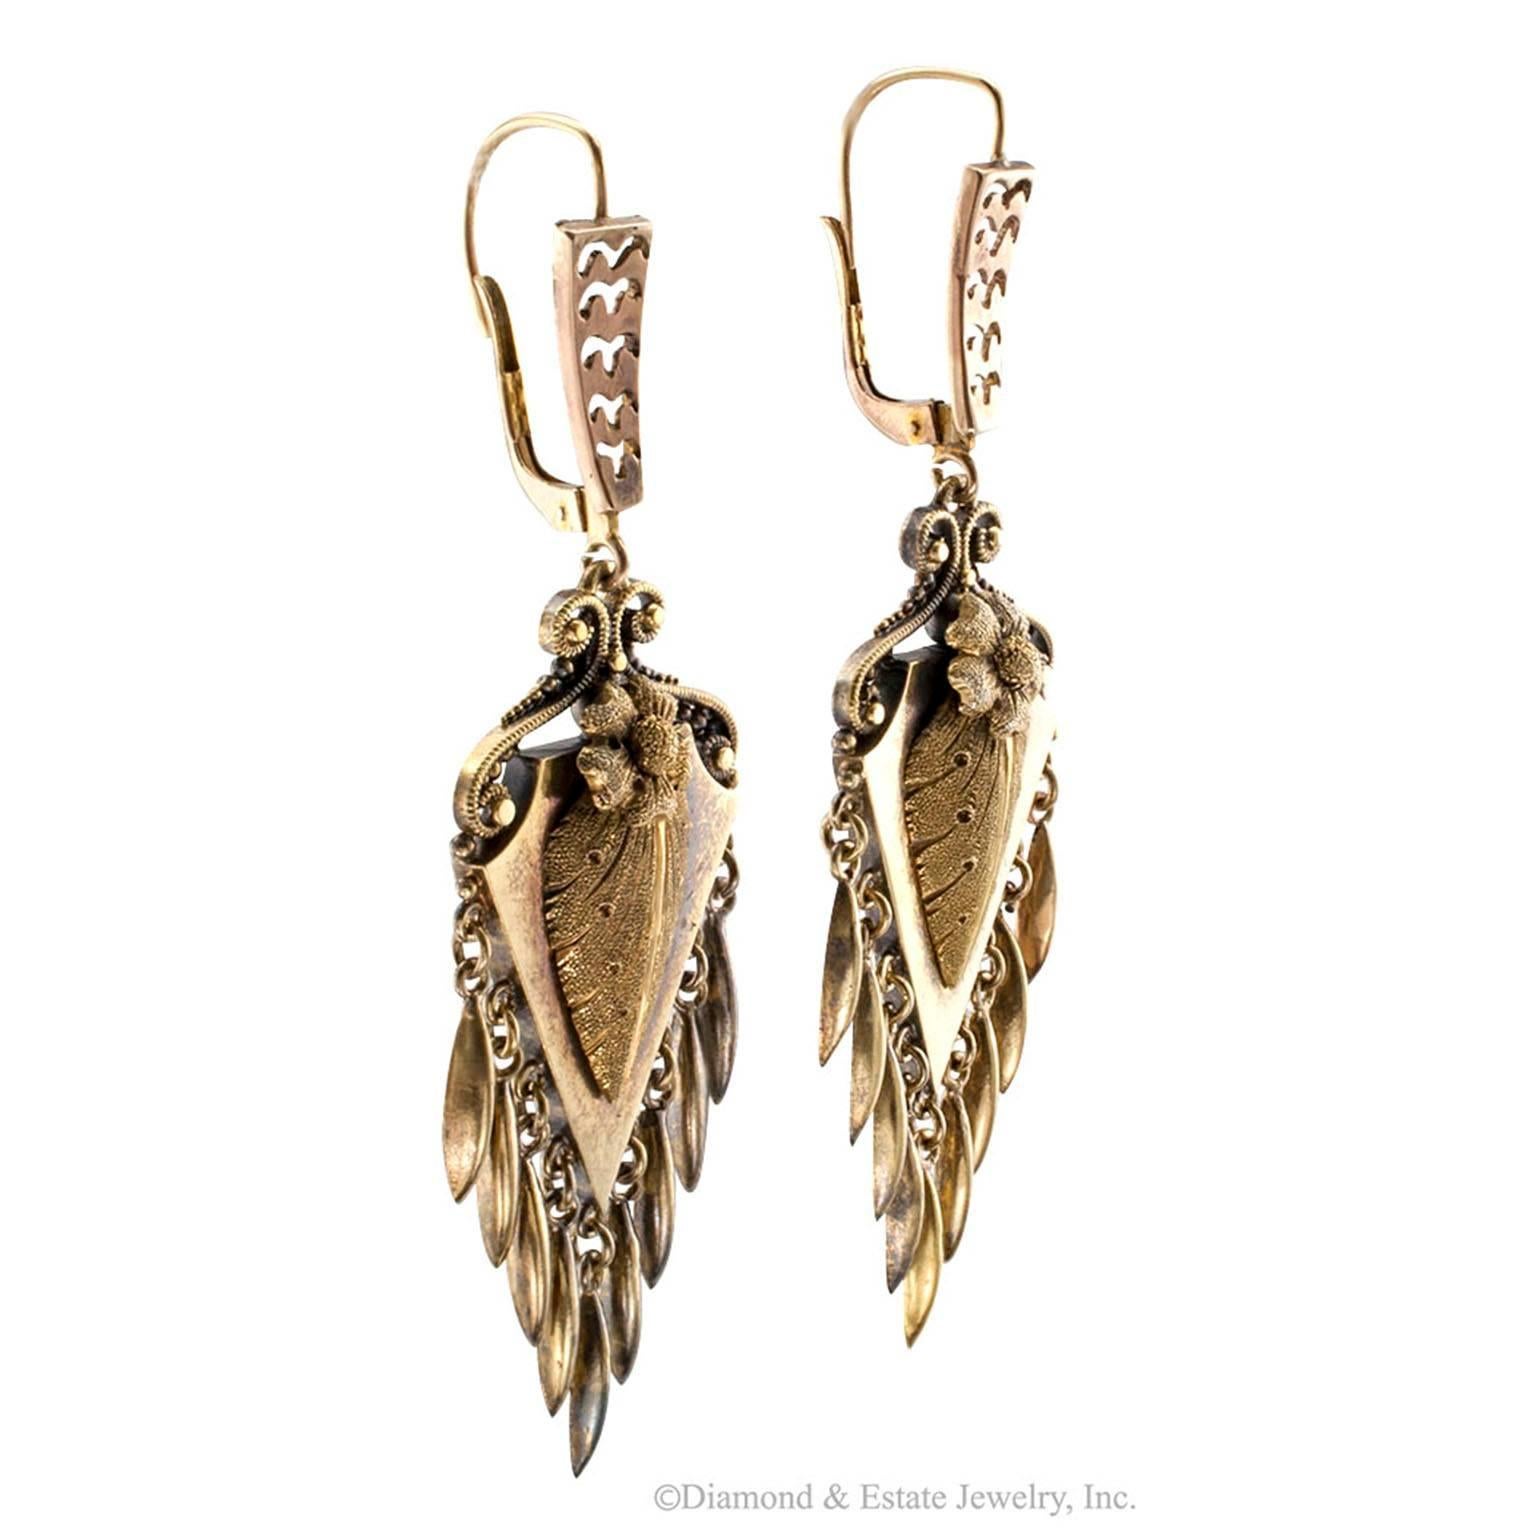 Victorian 1880s Gold Pendent Earrings

Victorian 1880s gold pendent earrings.  The matching surmounts suspending arrowhead-shaped motifs lavishly decorated  throughout by a single flower supported by an acanthus leaf, the latter, both finished in